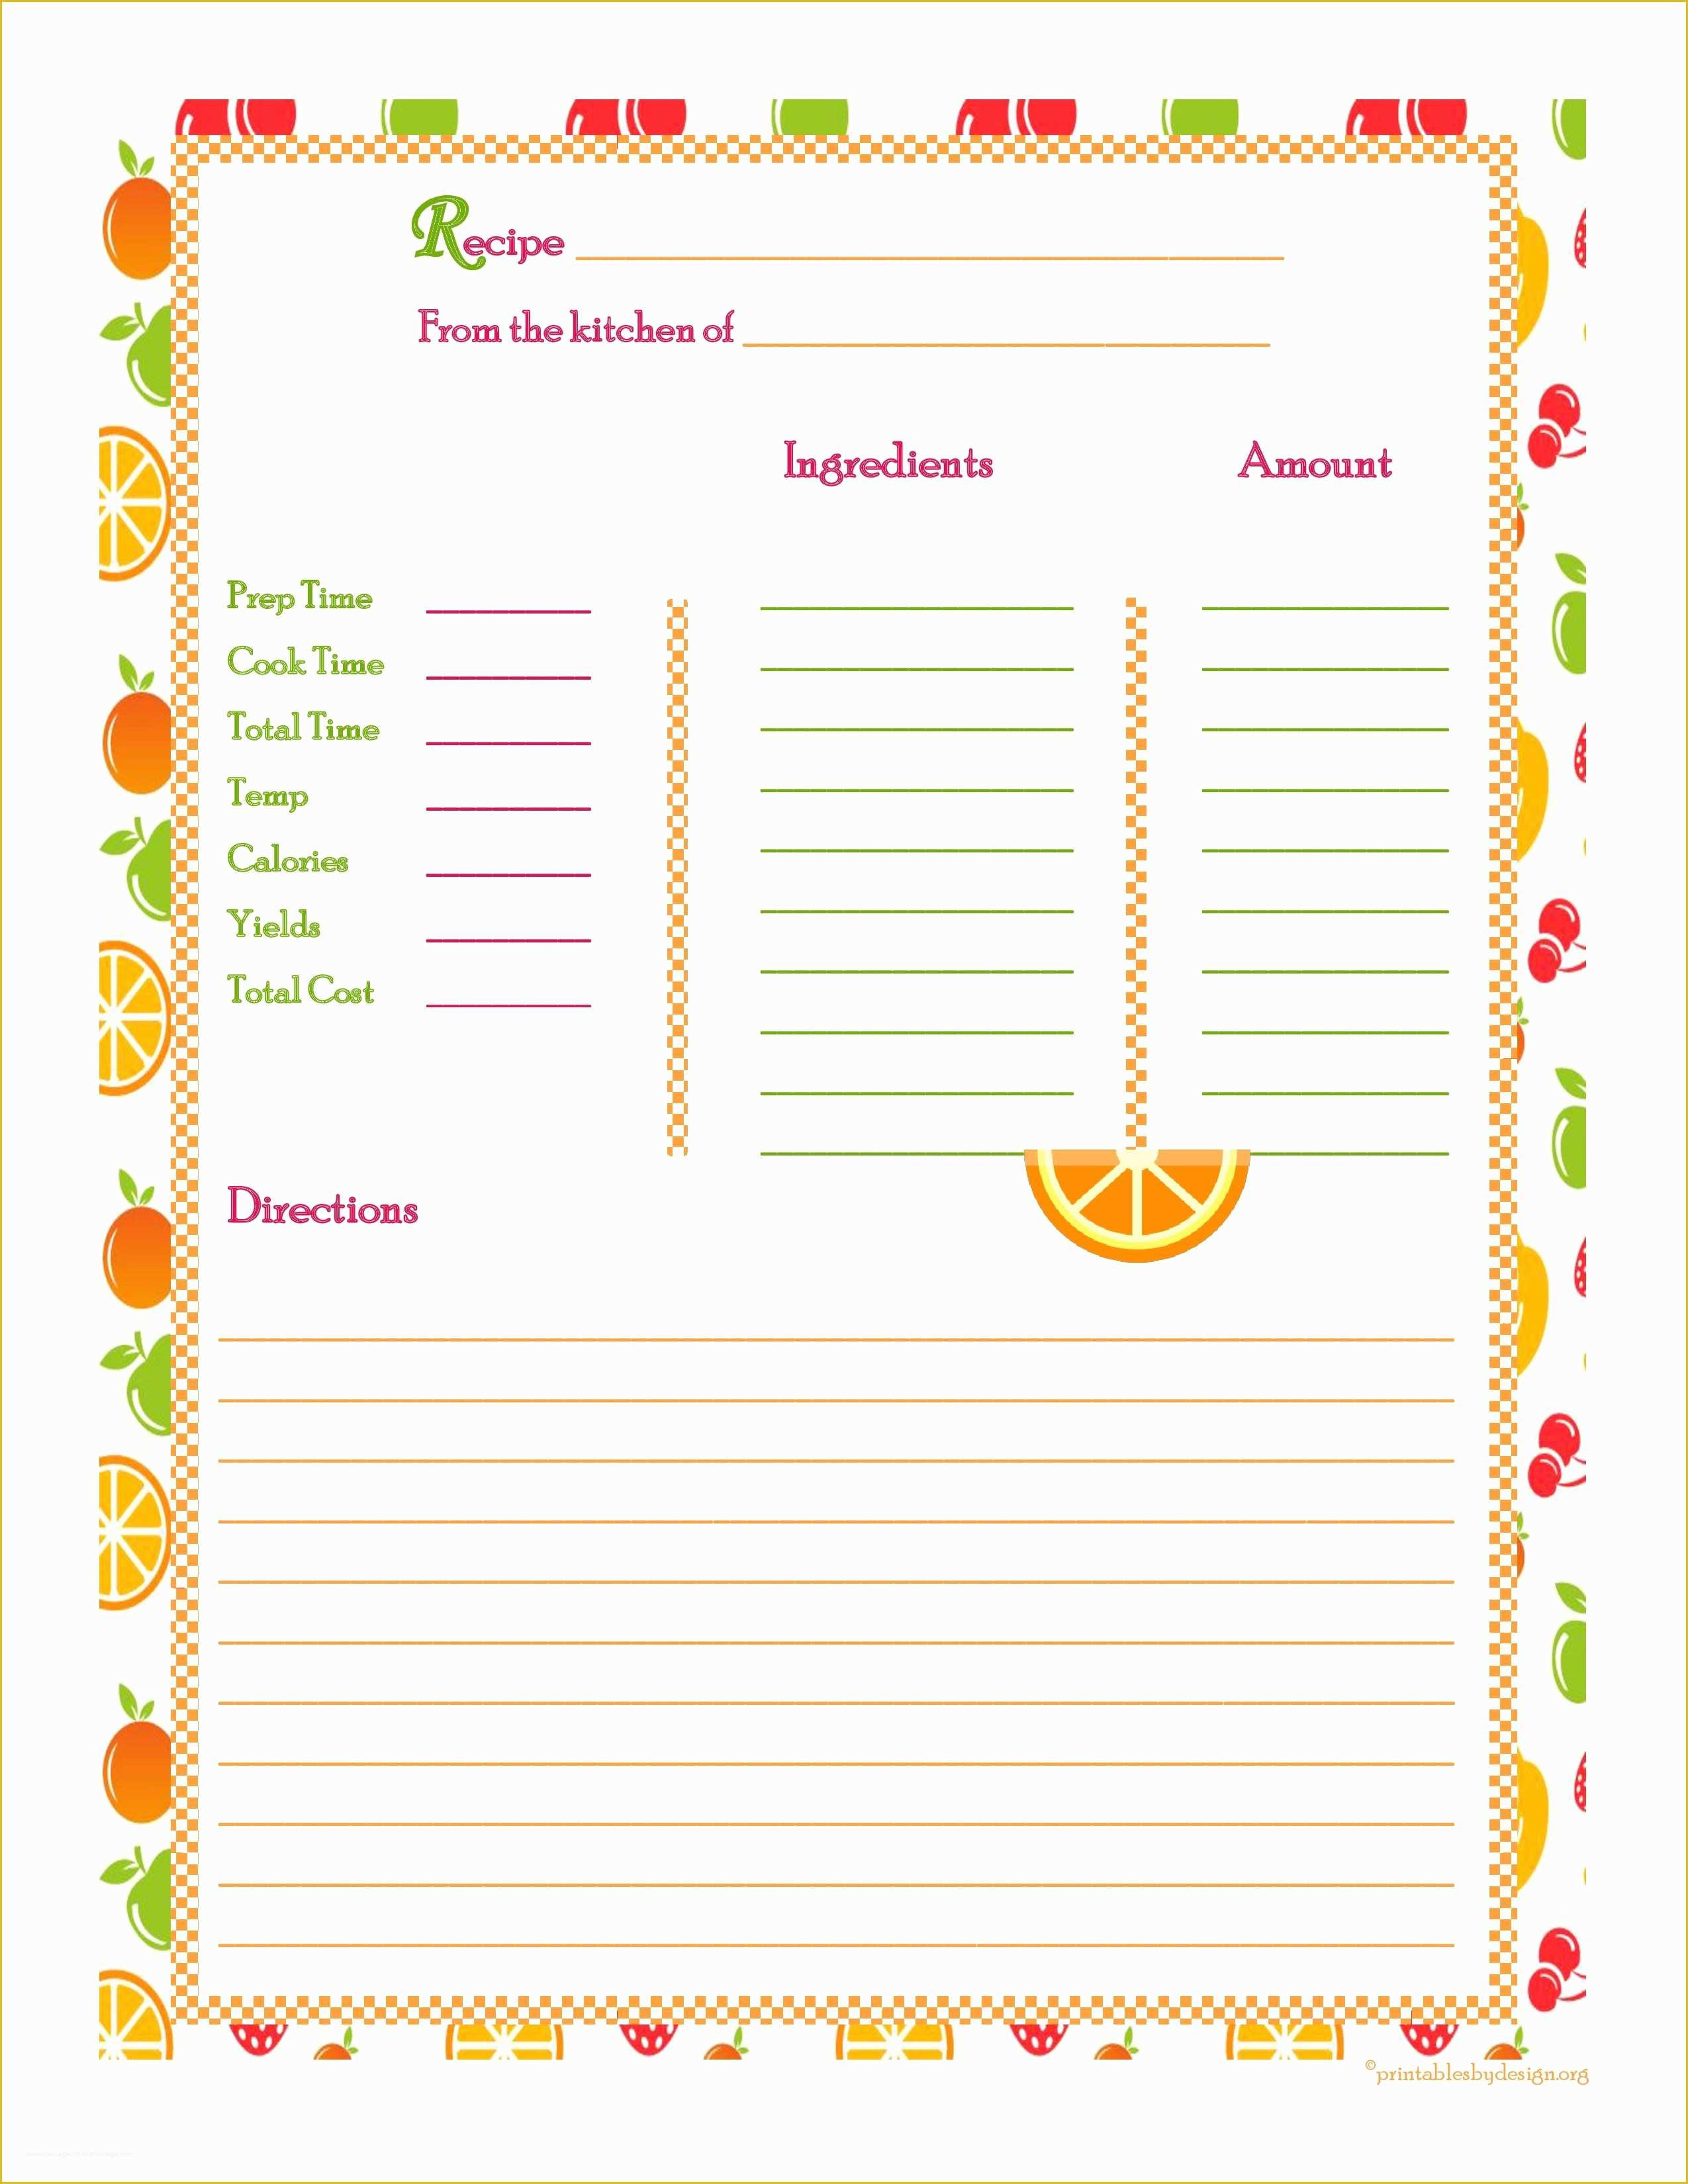 Free Apple Pages Templates Recipe Book Template Apple Of Apple Pages Business Card Template